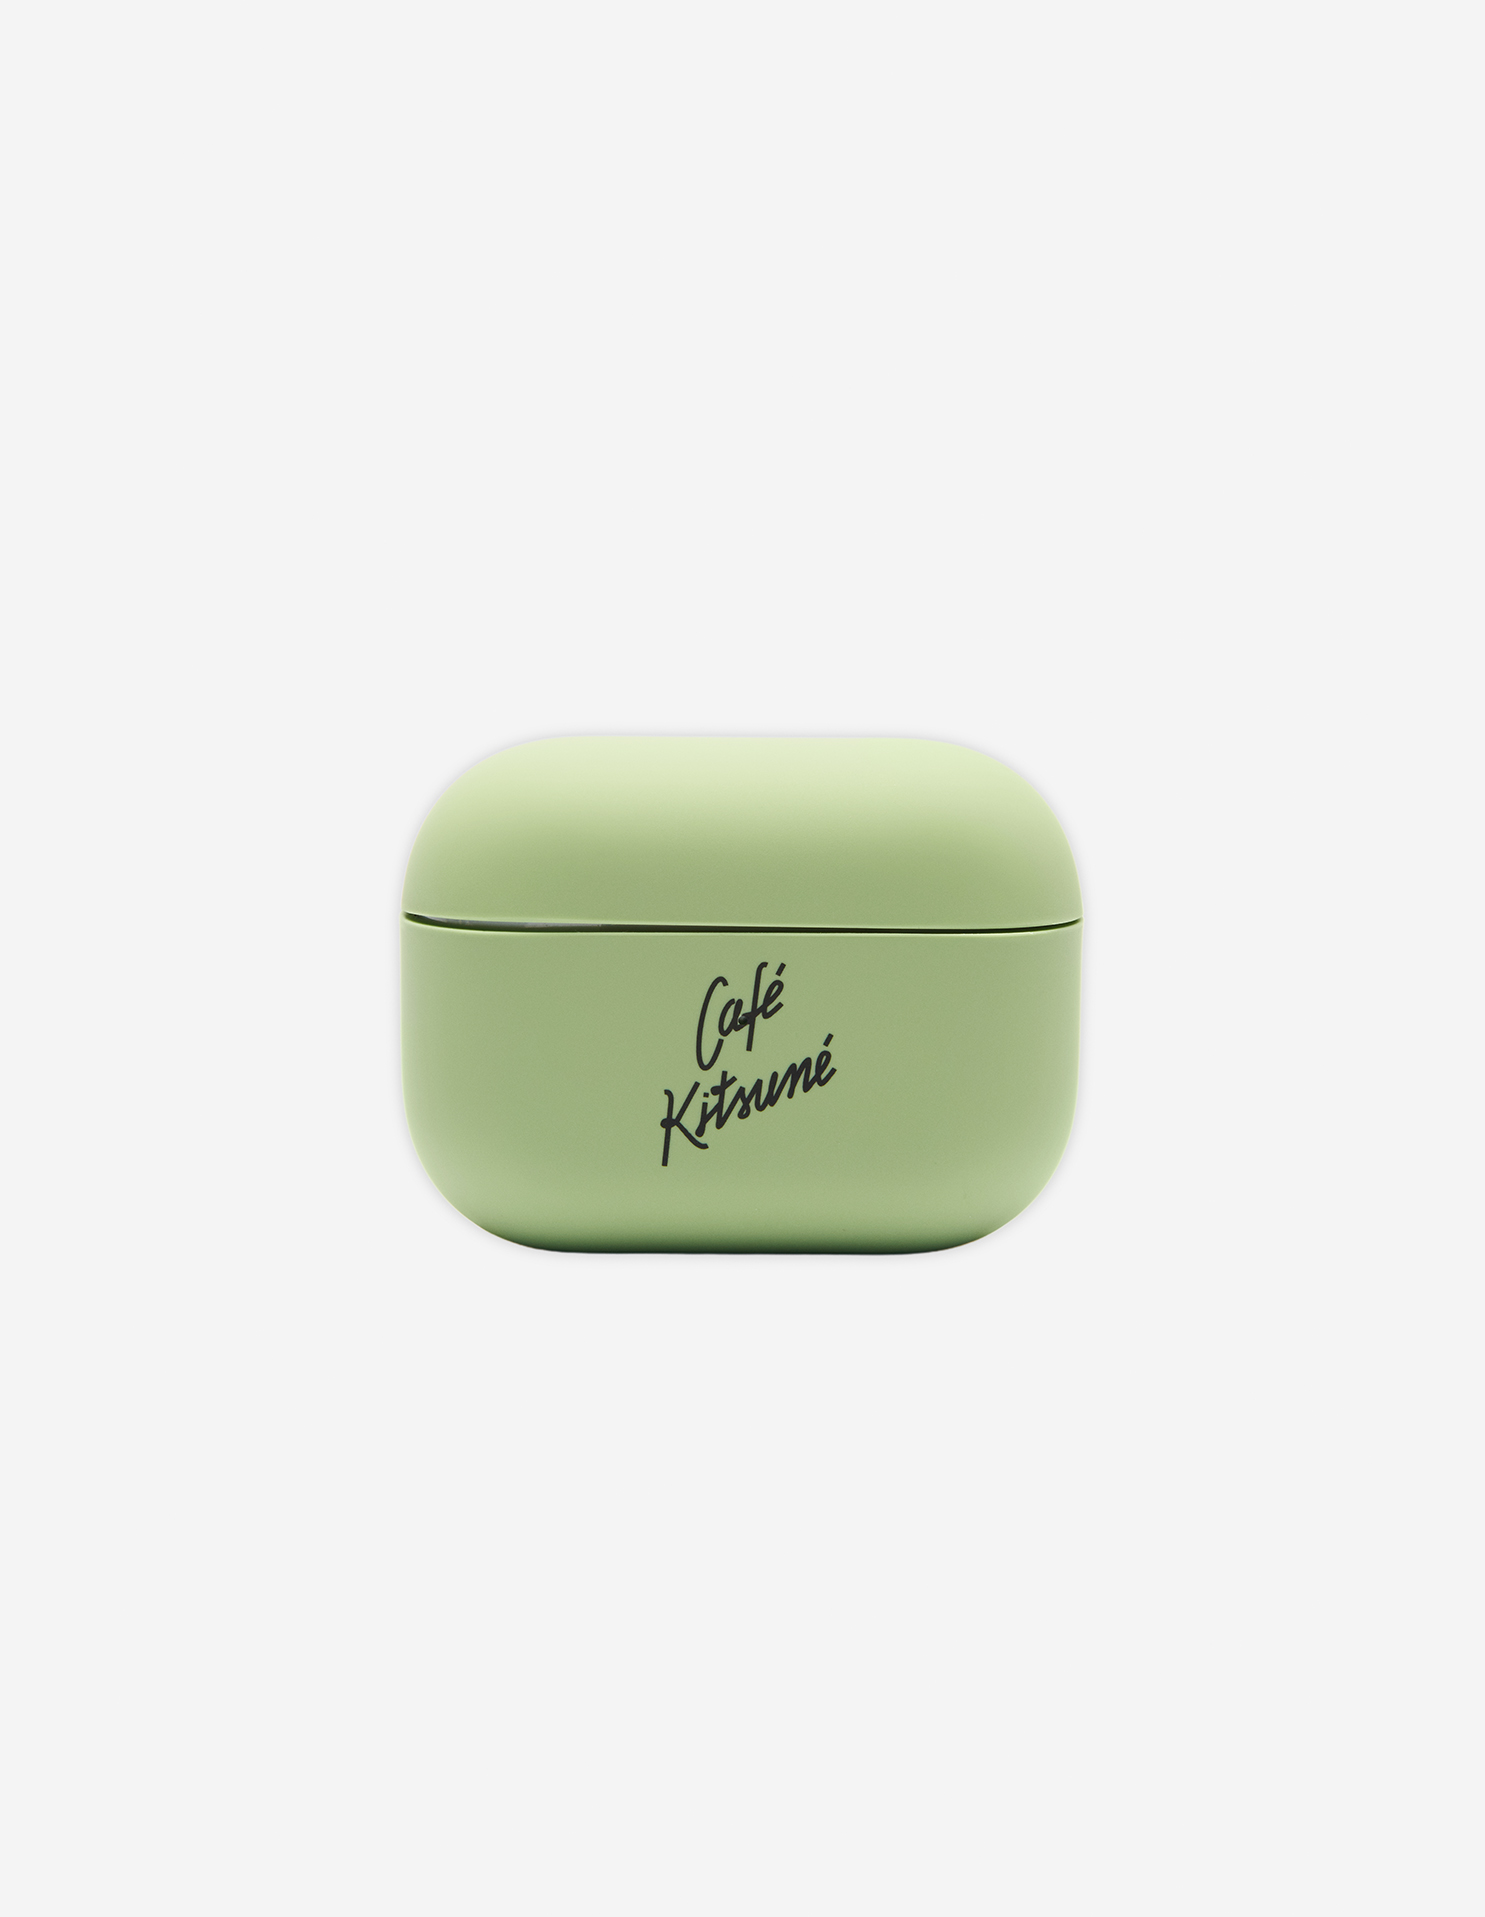 CAFE KITSUNE CASE FOR AIRPODS PRO MATCHA